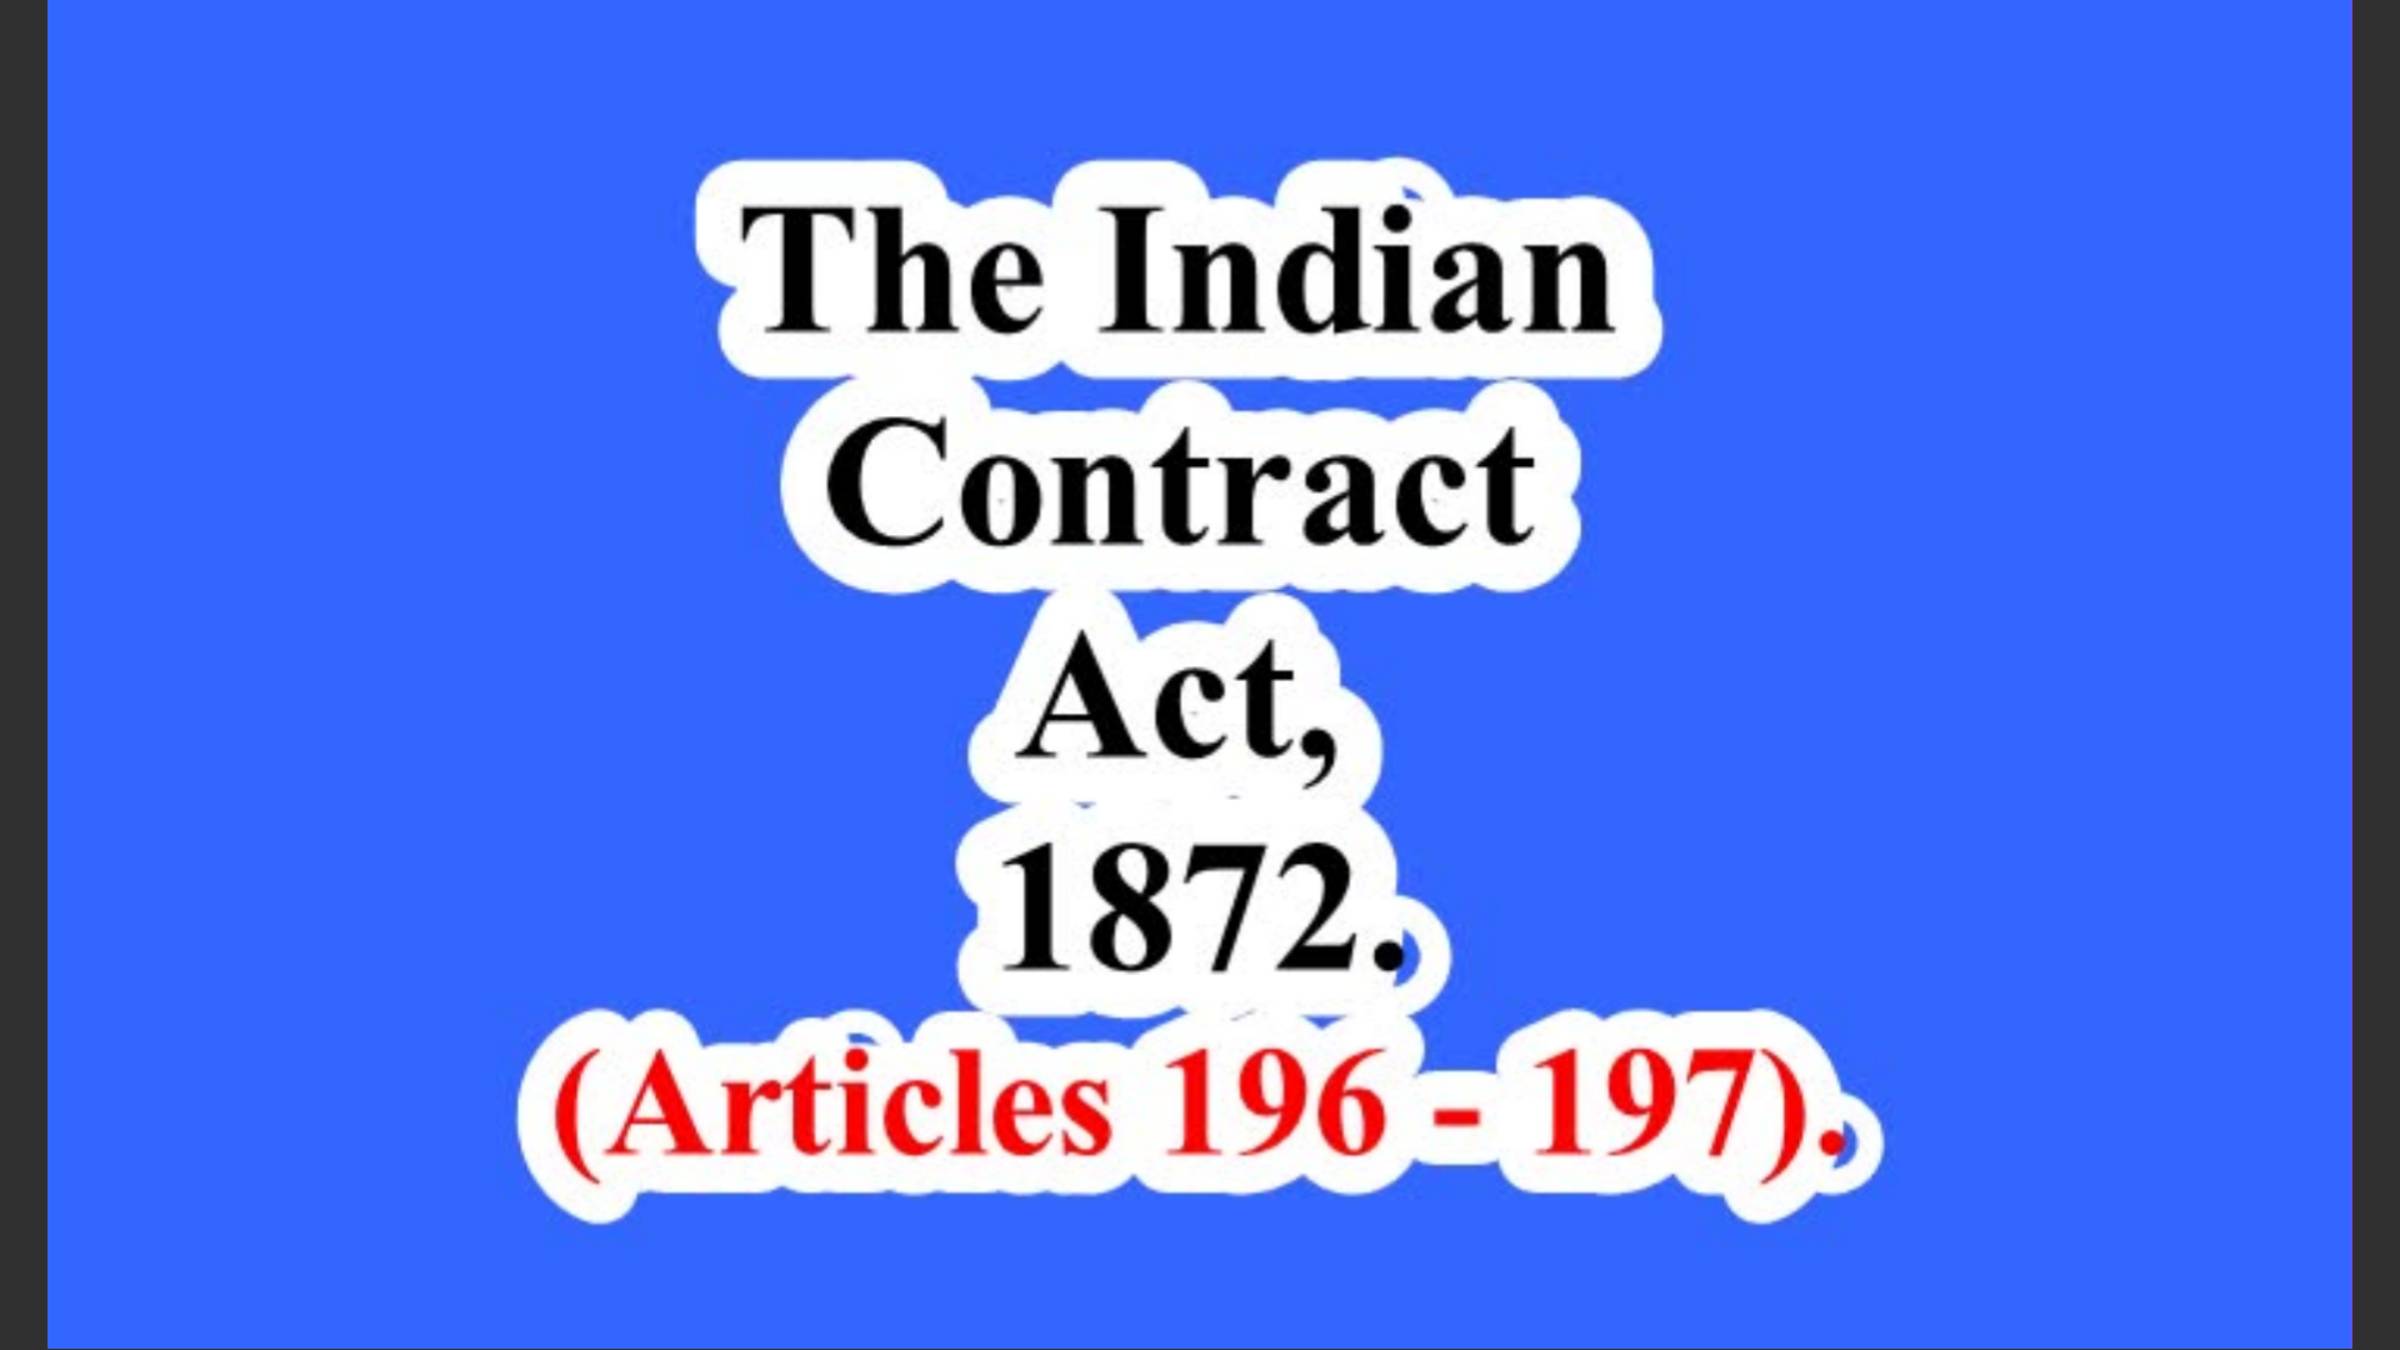 The Indian Contract Act, 1872. (Articles 196 – 197).